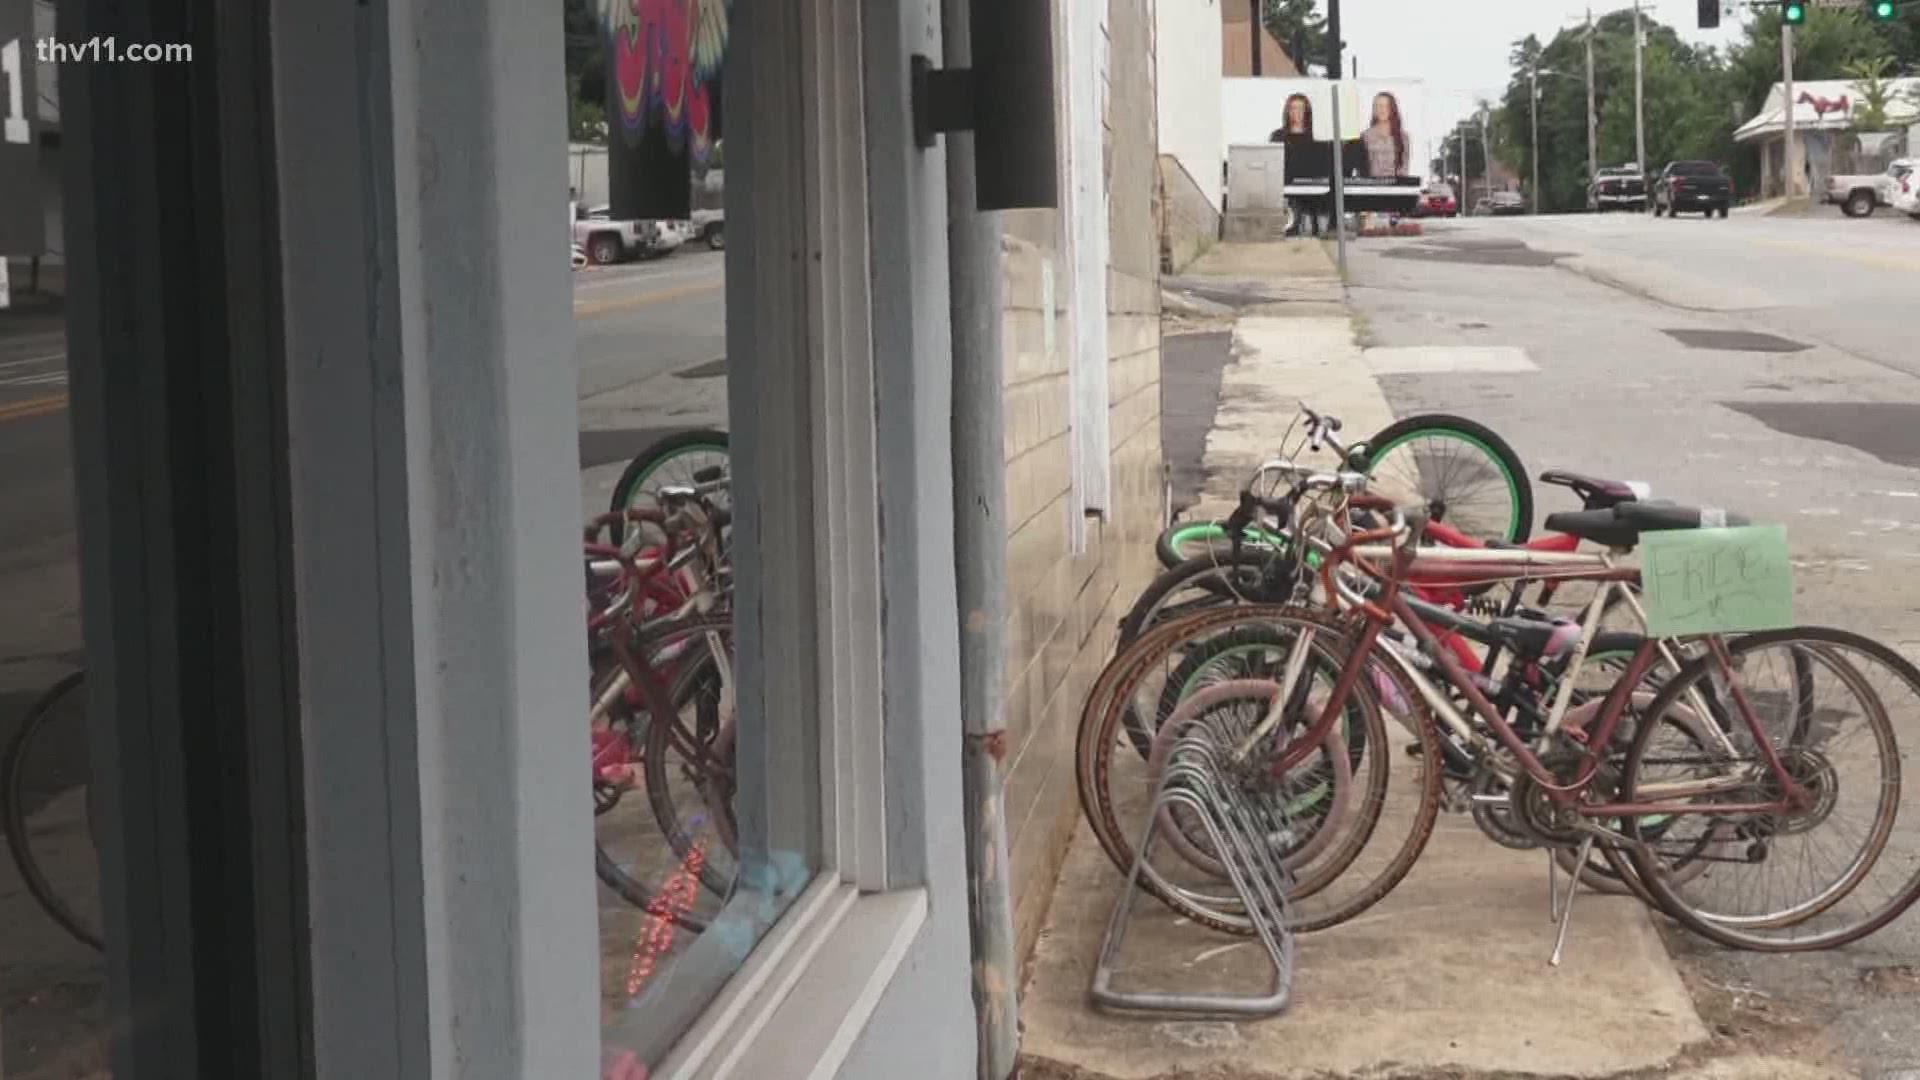 Bike sales have soared during the pandemic and finding one you like has become difficult for shoppers. One business is helping out in a big way.